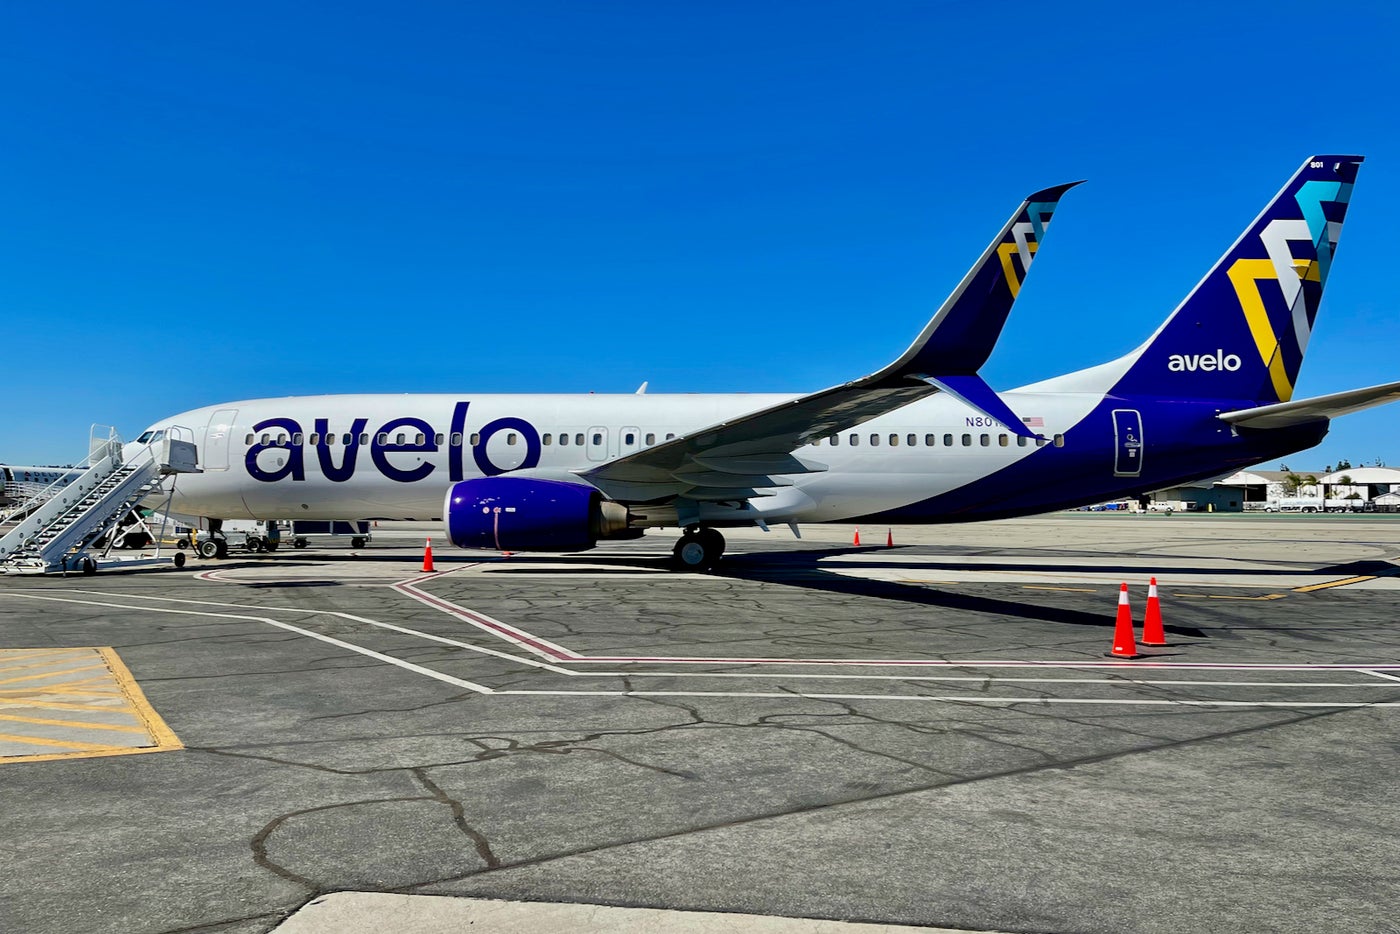 First look inside Avelo's Boeing 737800, and where to sit